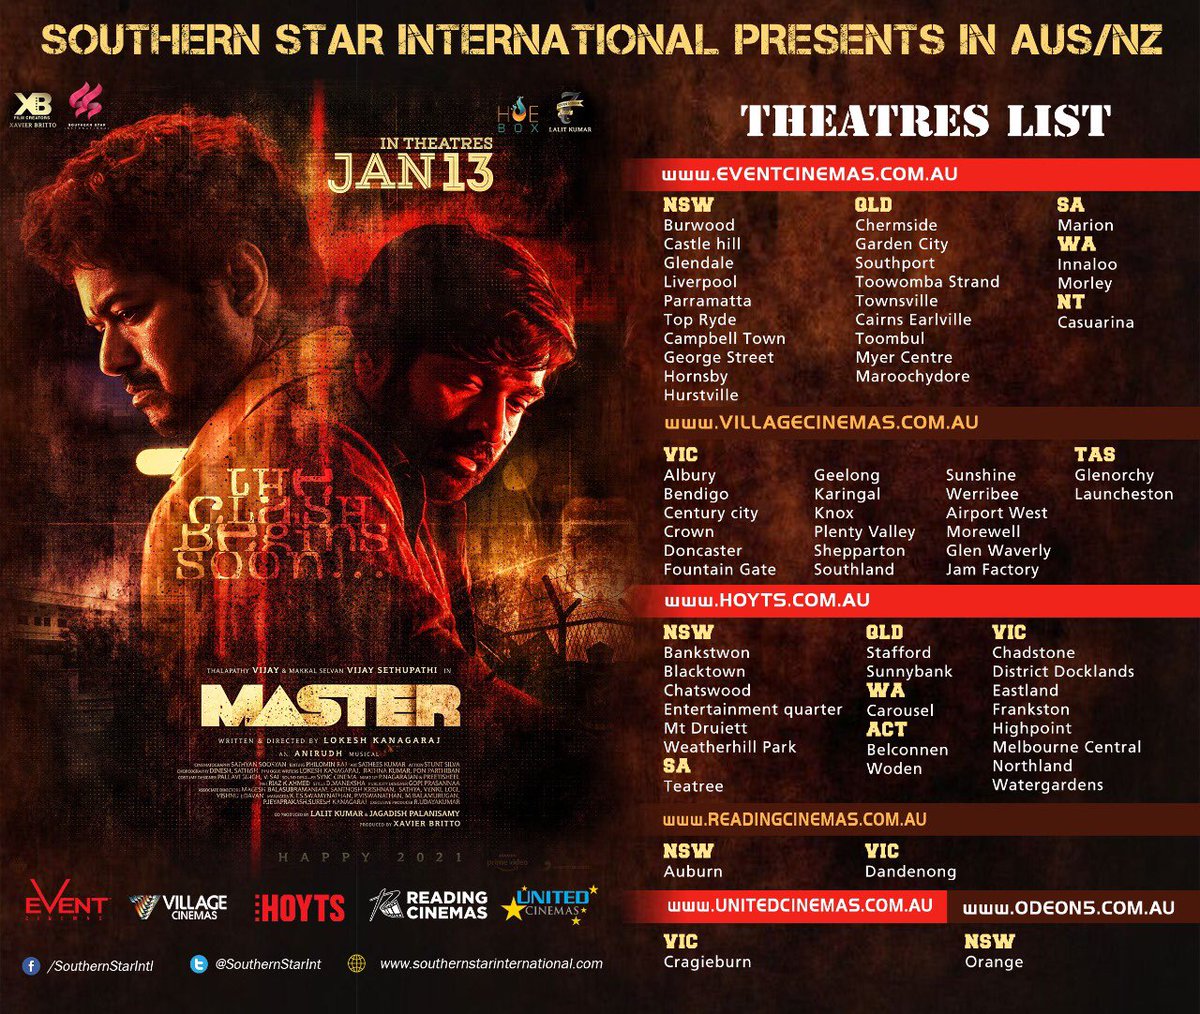 Here You Go!! #Master Australia location list. Advance bookings will open from Monday midnight. Release by @SouthernStarInt.